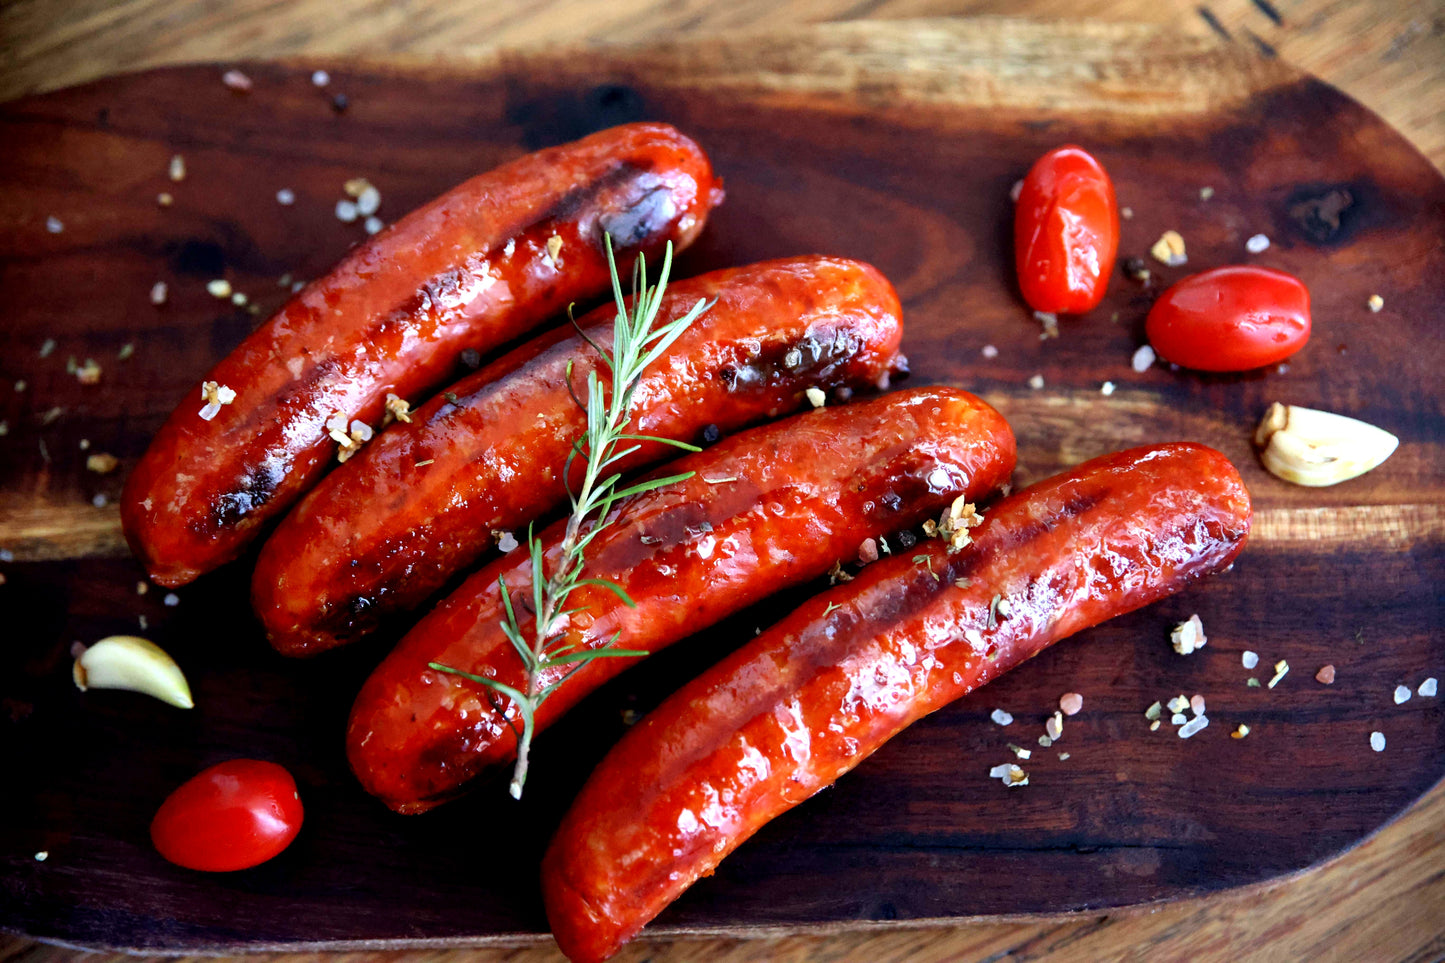 Fresh Spanish Chorizo Random weight approx. 1kg packet 8 pieces regular price $16.00 AUD. You are guaranteed to receive at least 950g of product, equivalent price of $16.84 per kg.